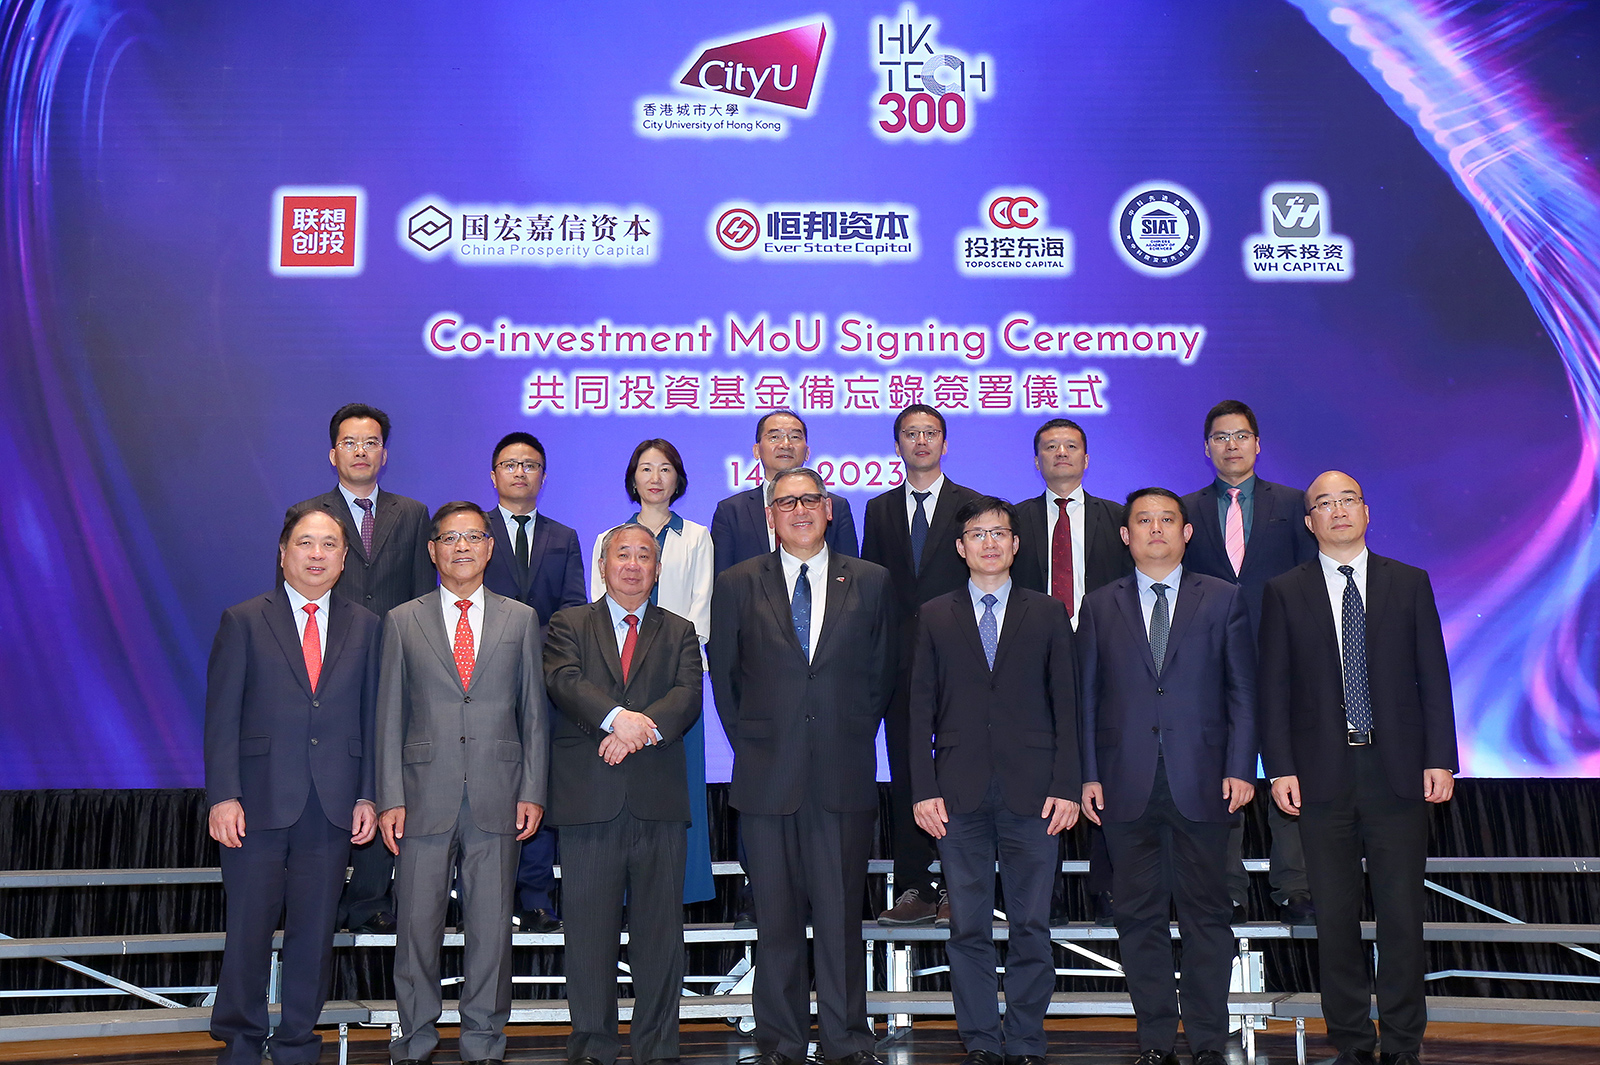 CityU signed MoUs with six venture capital funds from the mainland. Dr Wang Weiming, Director-General of the Department of Educational, Scientific and Technological Affairs, Liaison Office of the Central People’s Government in HKSAR (front row, 3rd from right), Mr Lester Garson Huang, CityU’s Council Chairman (front row, 4th from right), and Professor Freddy Boey, CityU President (front row, 3rd from left) took photo with the co-investment partners on the stage.